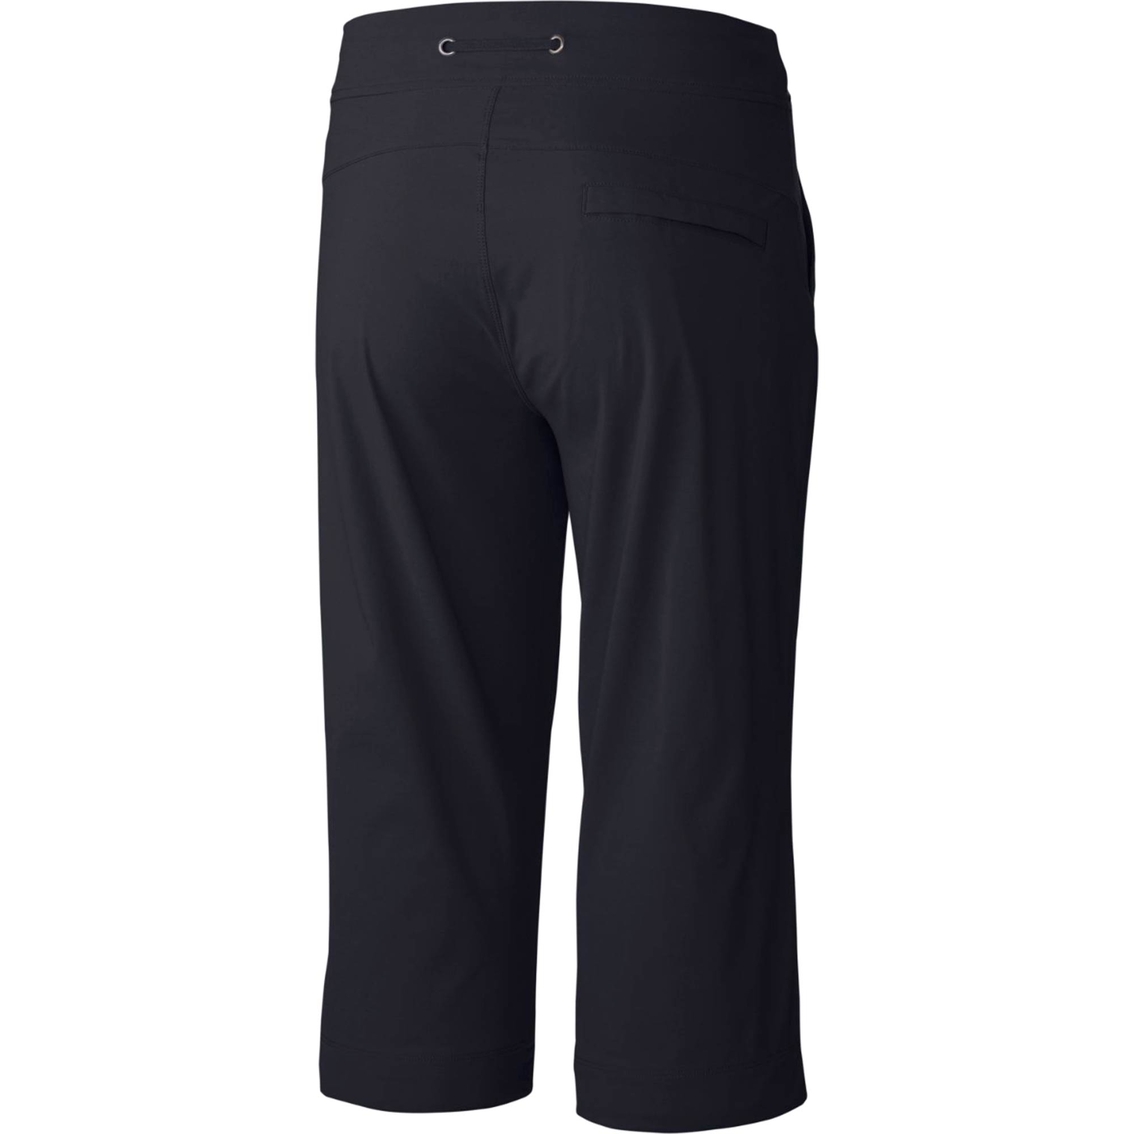 Columbia Plus Size Anytime Outdoor Capri Pants - Image 2 of 2